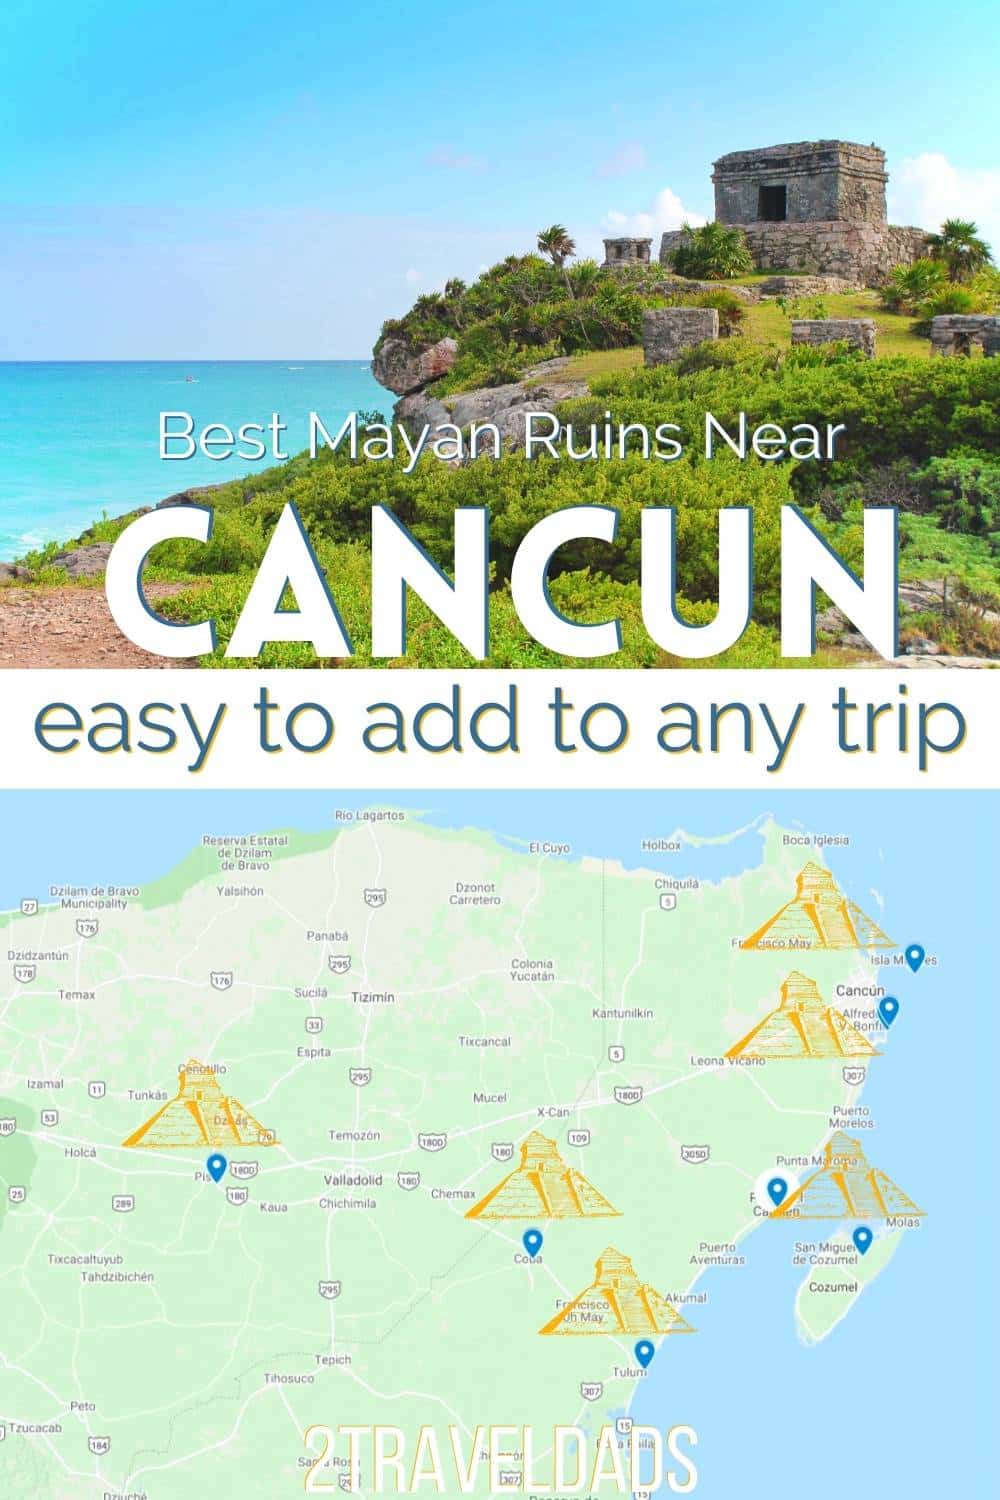 Add the best Mayan ruins near Cancun to a Yucatan vacation itinerary. From Cancun to Tulum, Mayan ruins are everywhere and are some of the most interesting things to do.